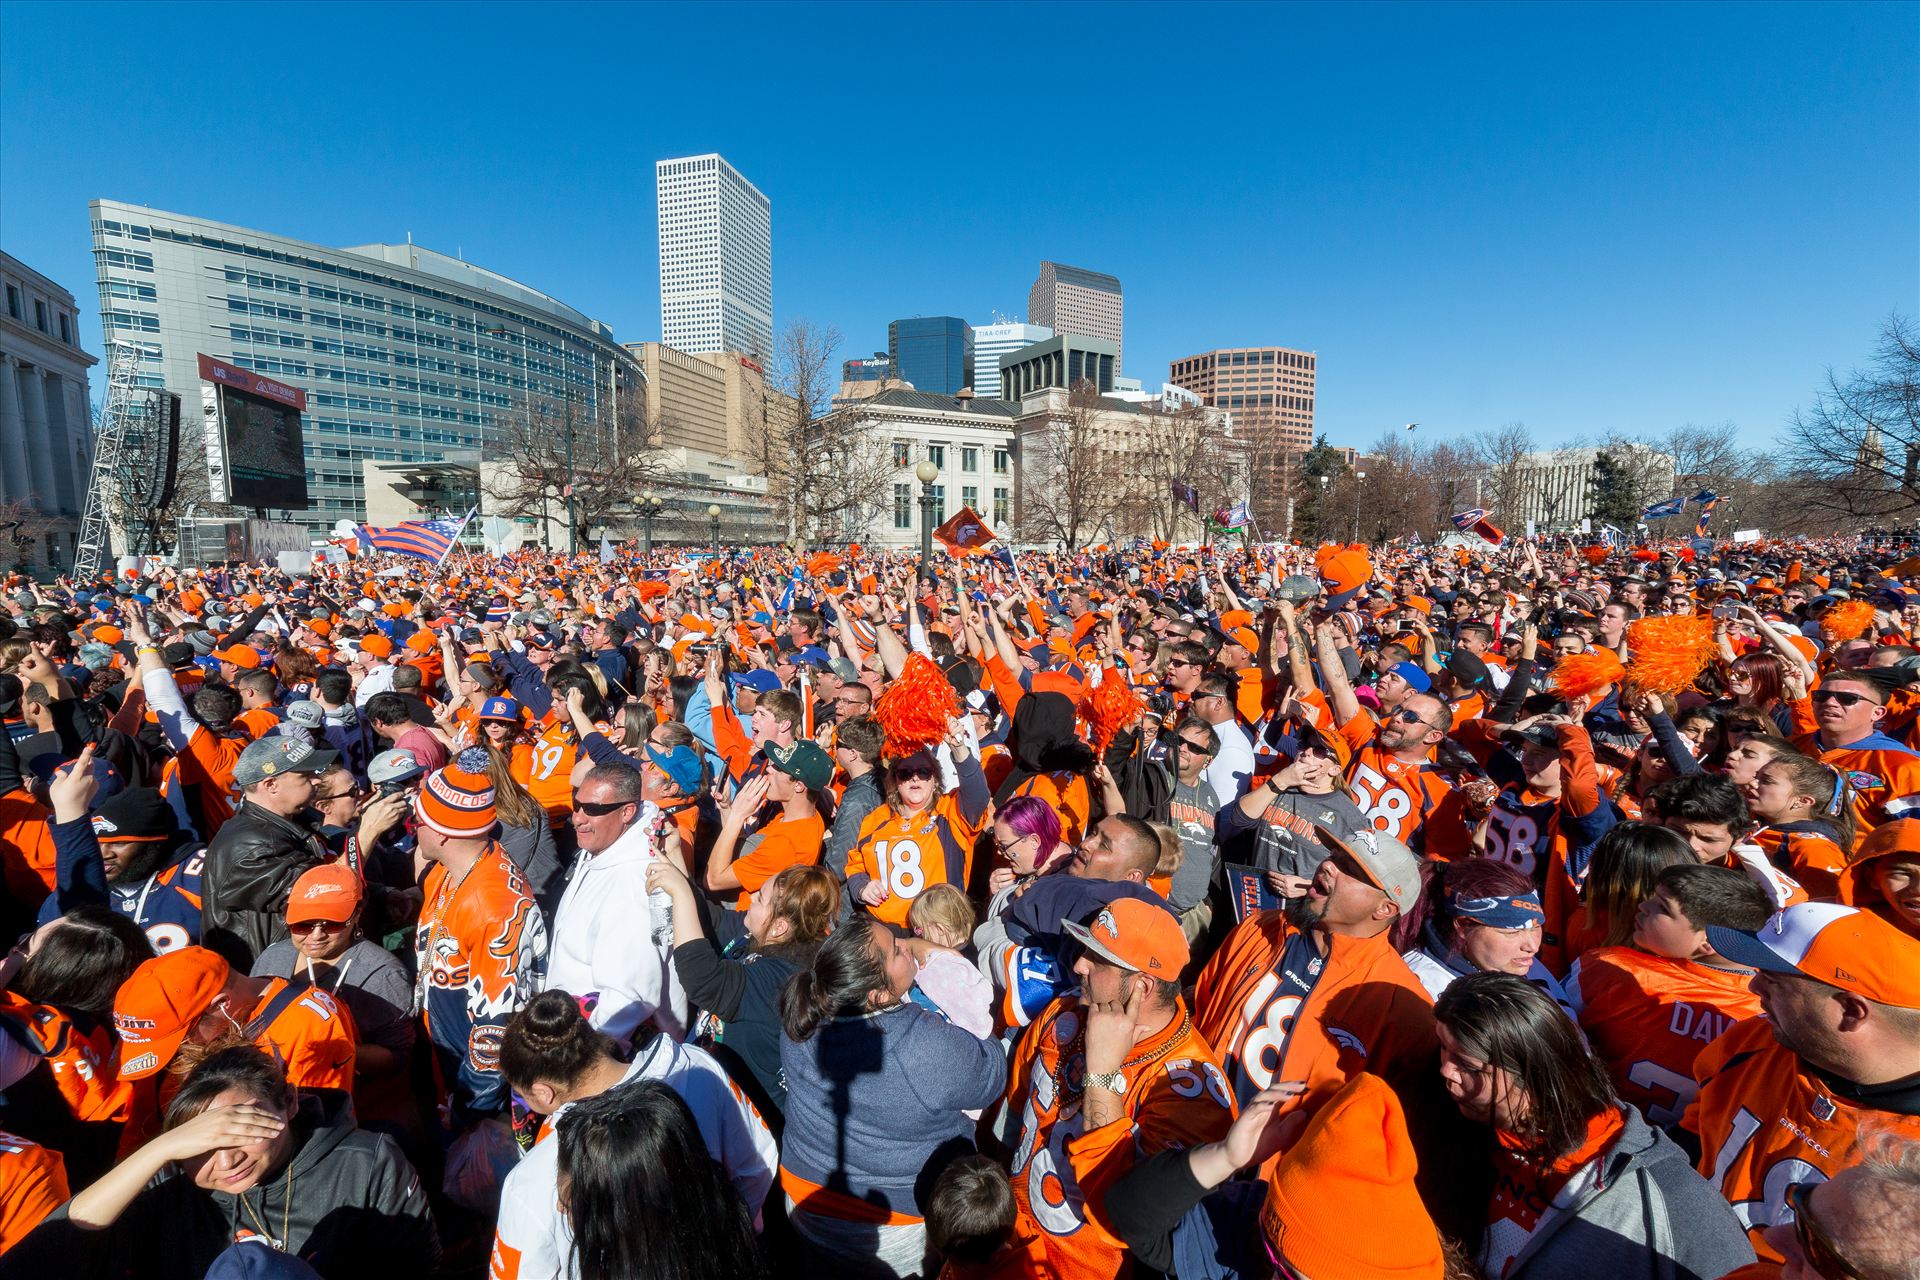 Broncos Fans 2 The best fans in the world descend on Civic Center Park in Denver Colorado for the Broncos Superbowl victory celebration. by Scott Smith Photos